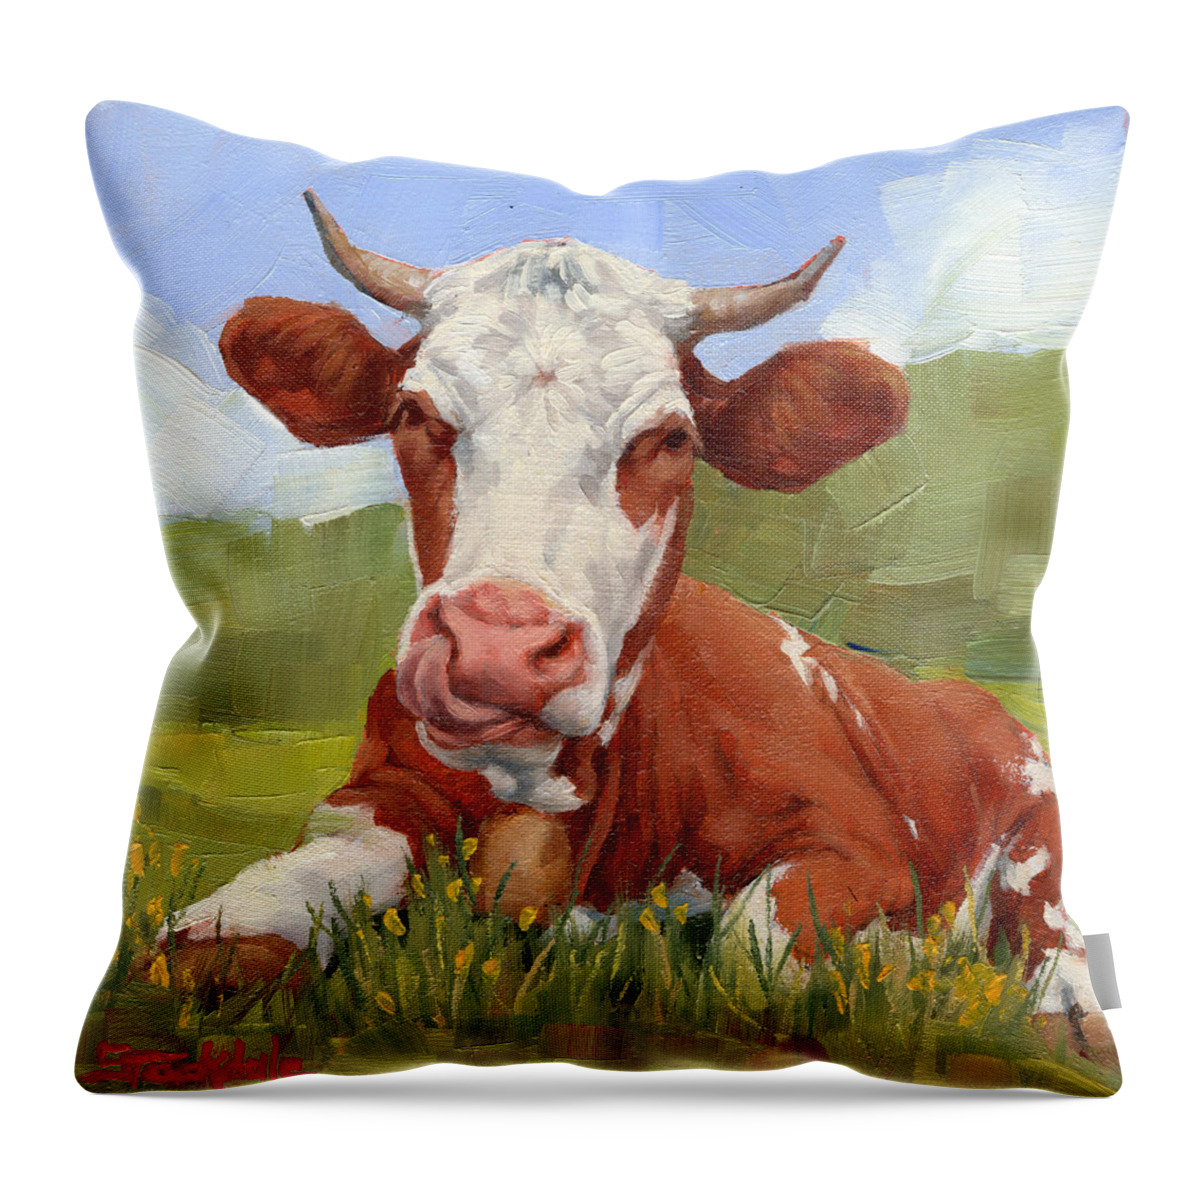 Cow Throw Pillow featuring the painting Cow Lick Mini Painting by Margaret Stockdale